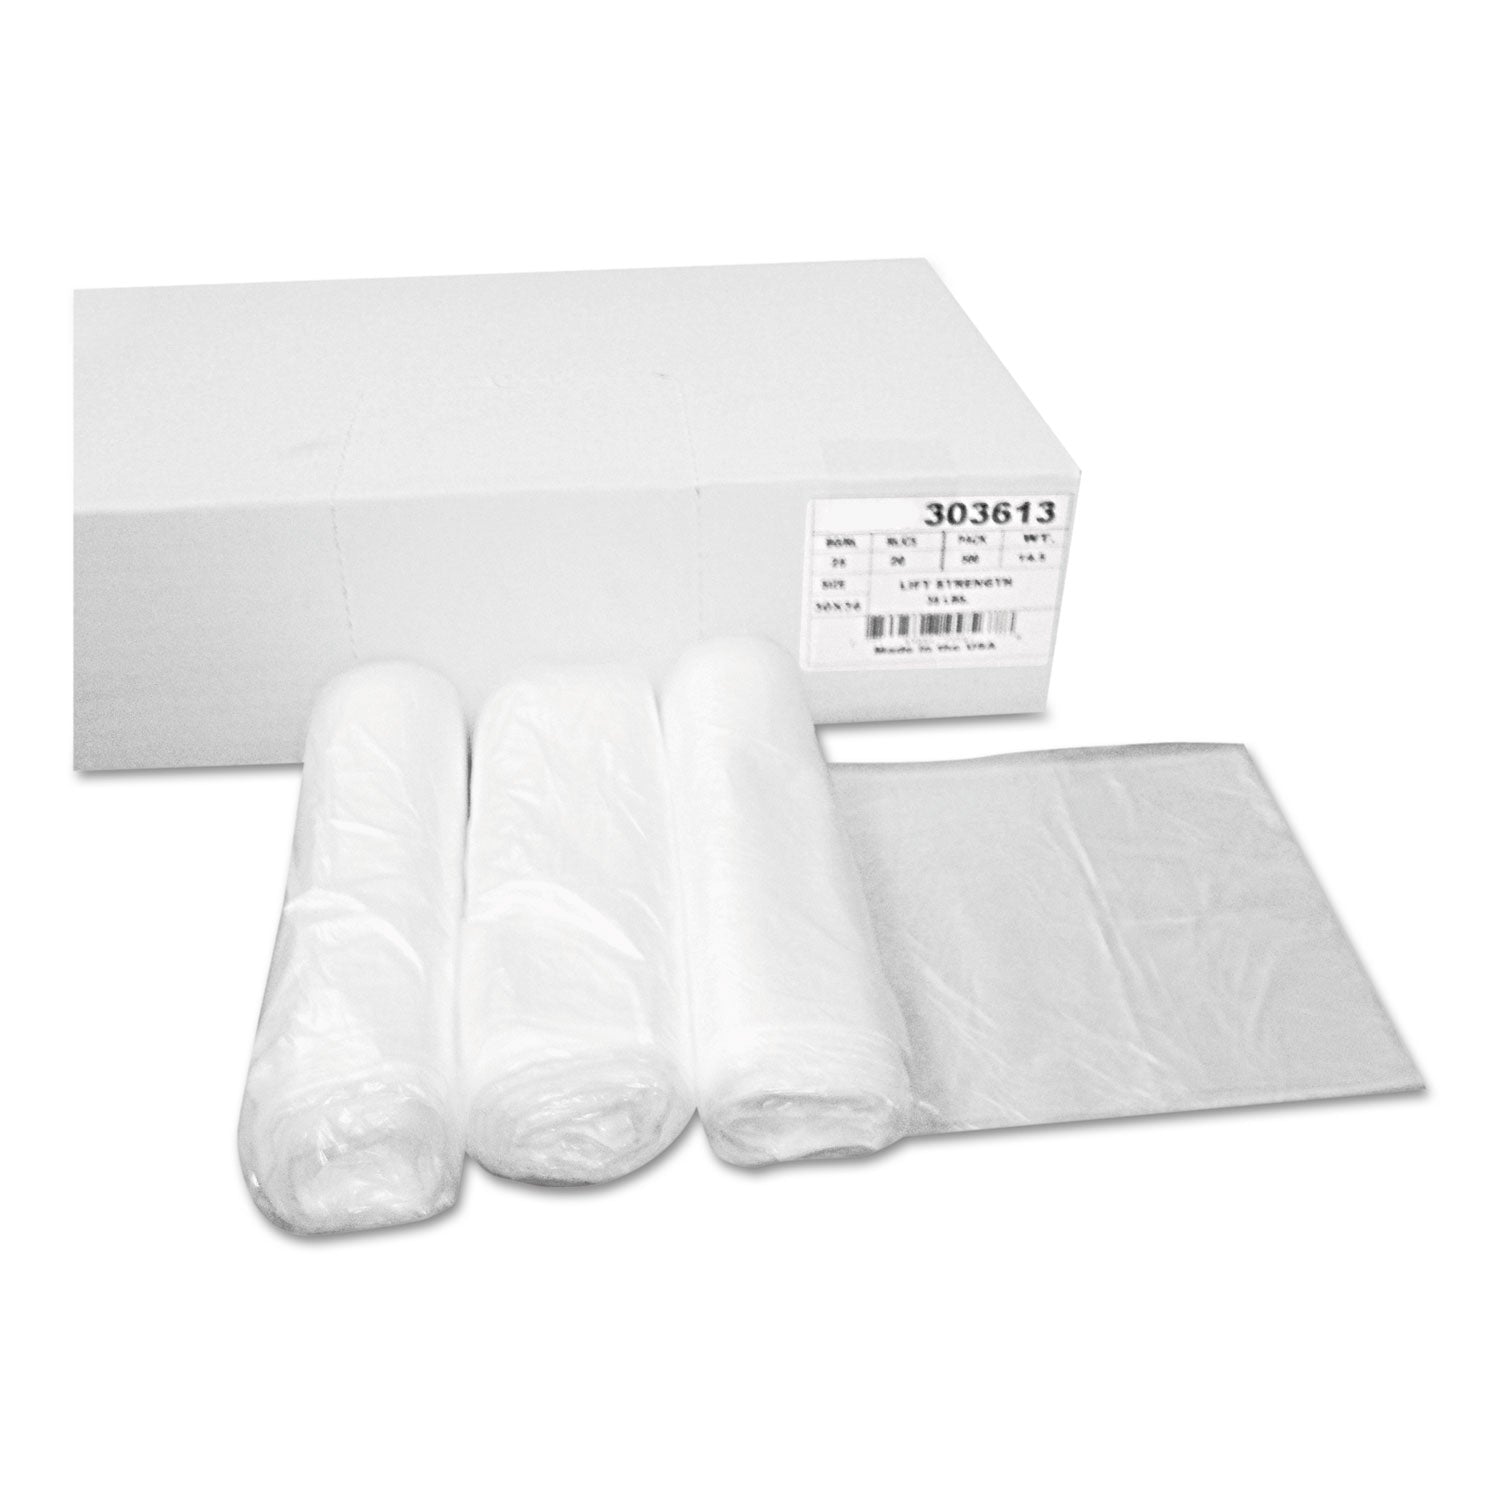 high-density-can-liners-30-gal-10-mic-30-x-36-natural-25-bags-roll-20-rolls-carton_bwk303613 - 1